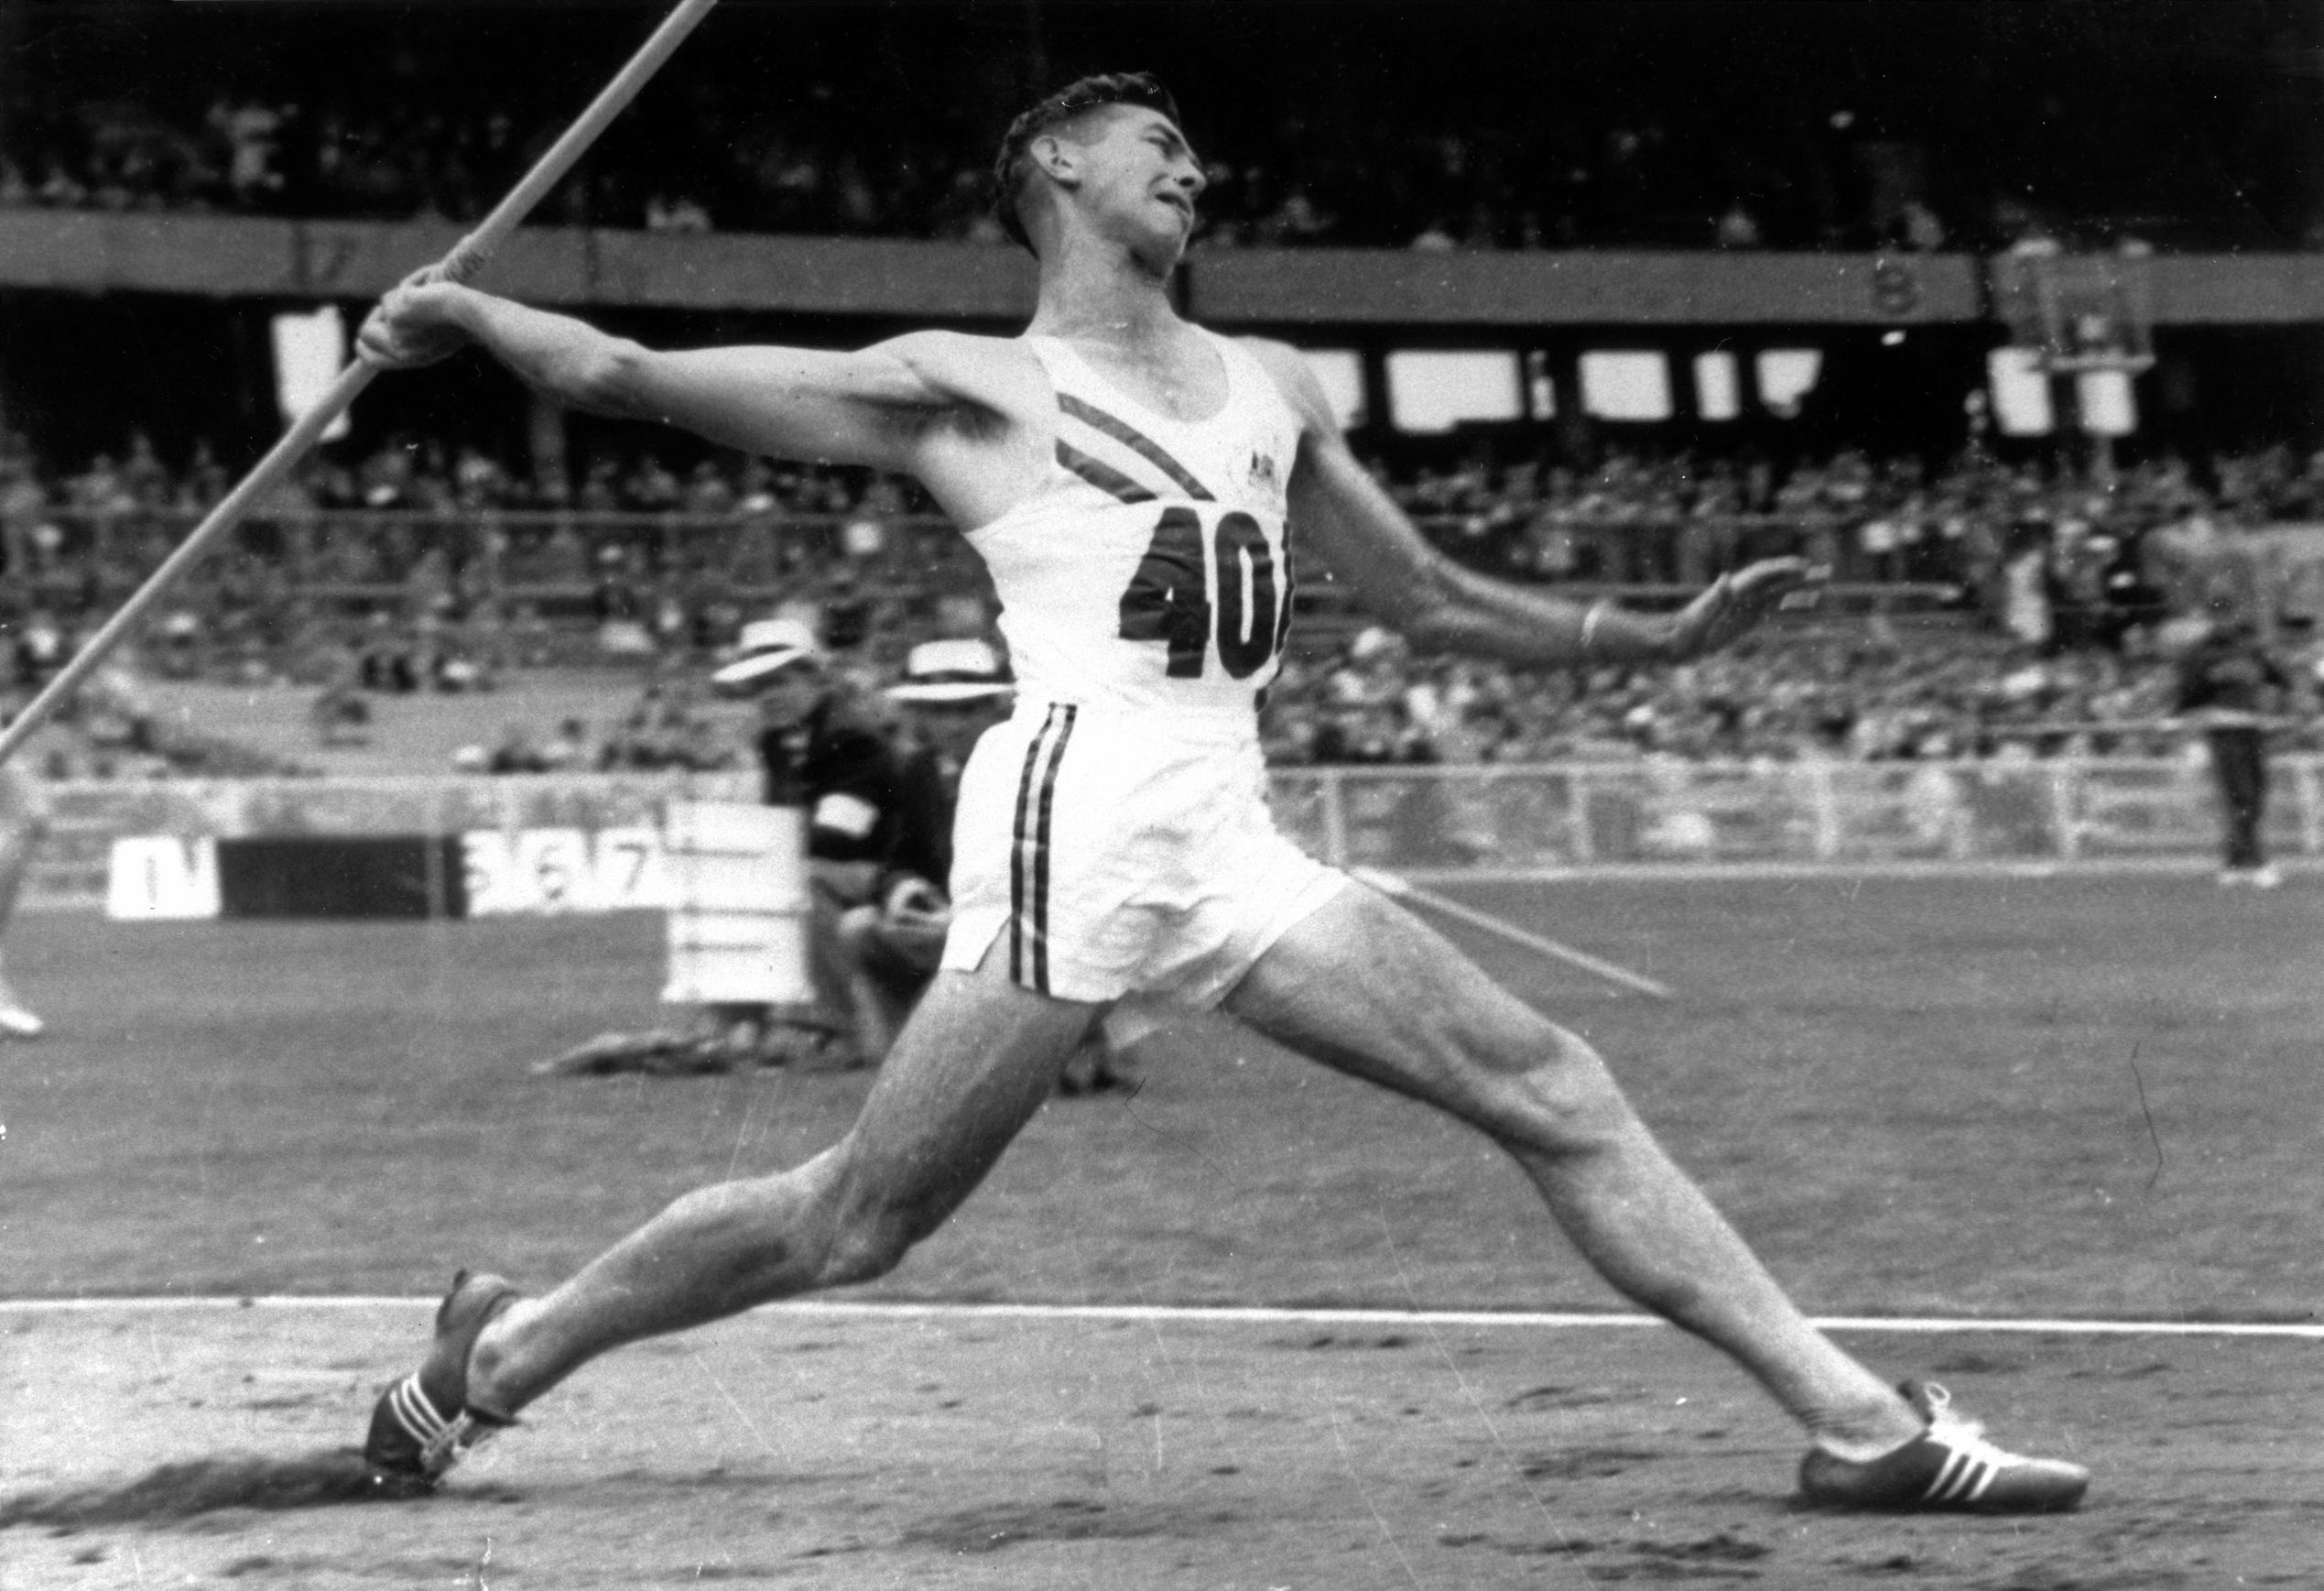 Olympian Jim Achurch competing in the javelin event at the 16th Olympic Games held in Melbourne, 1956.